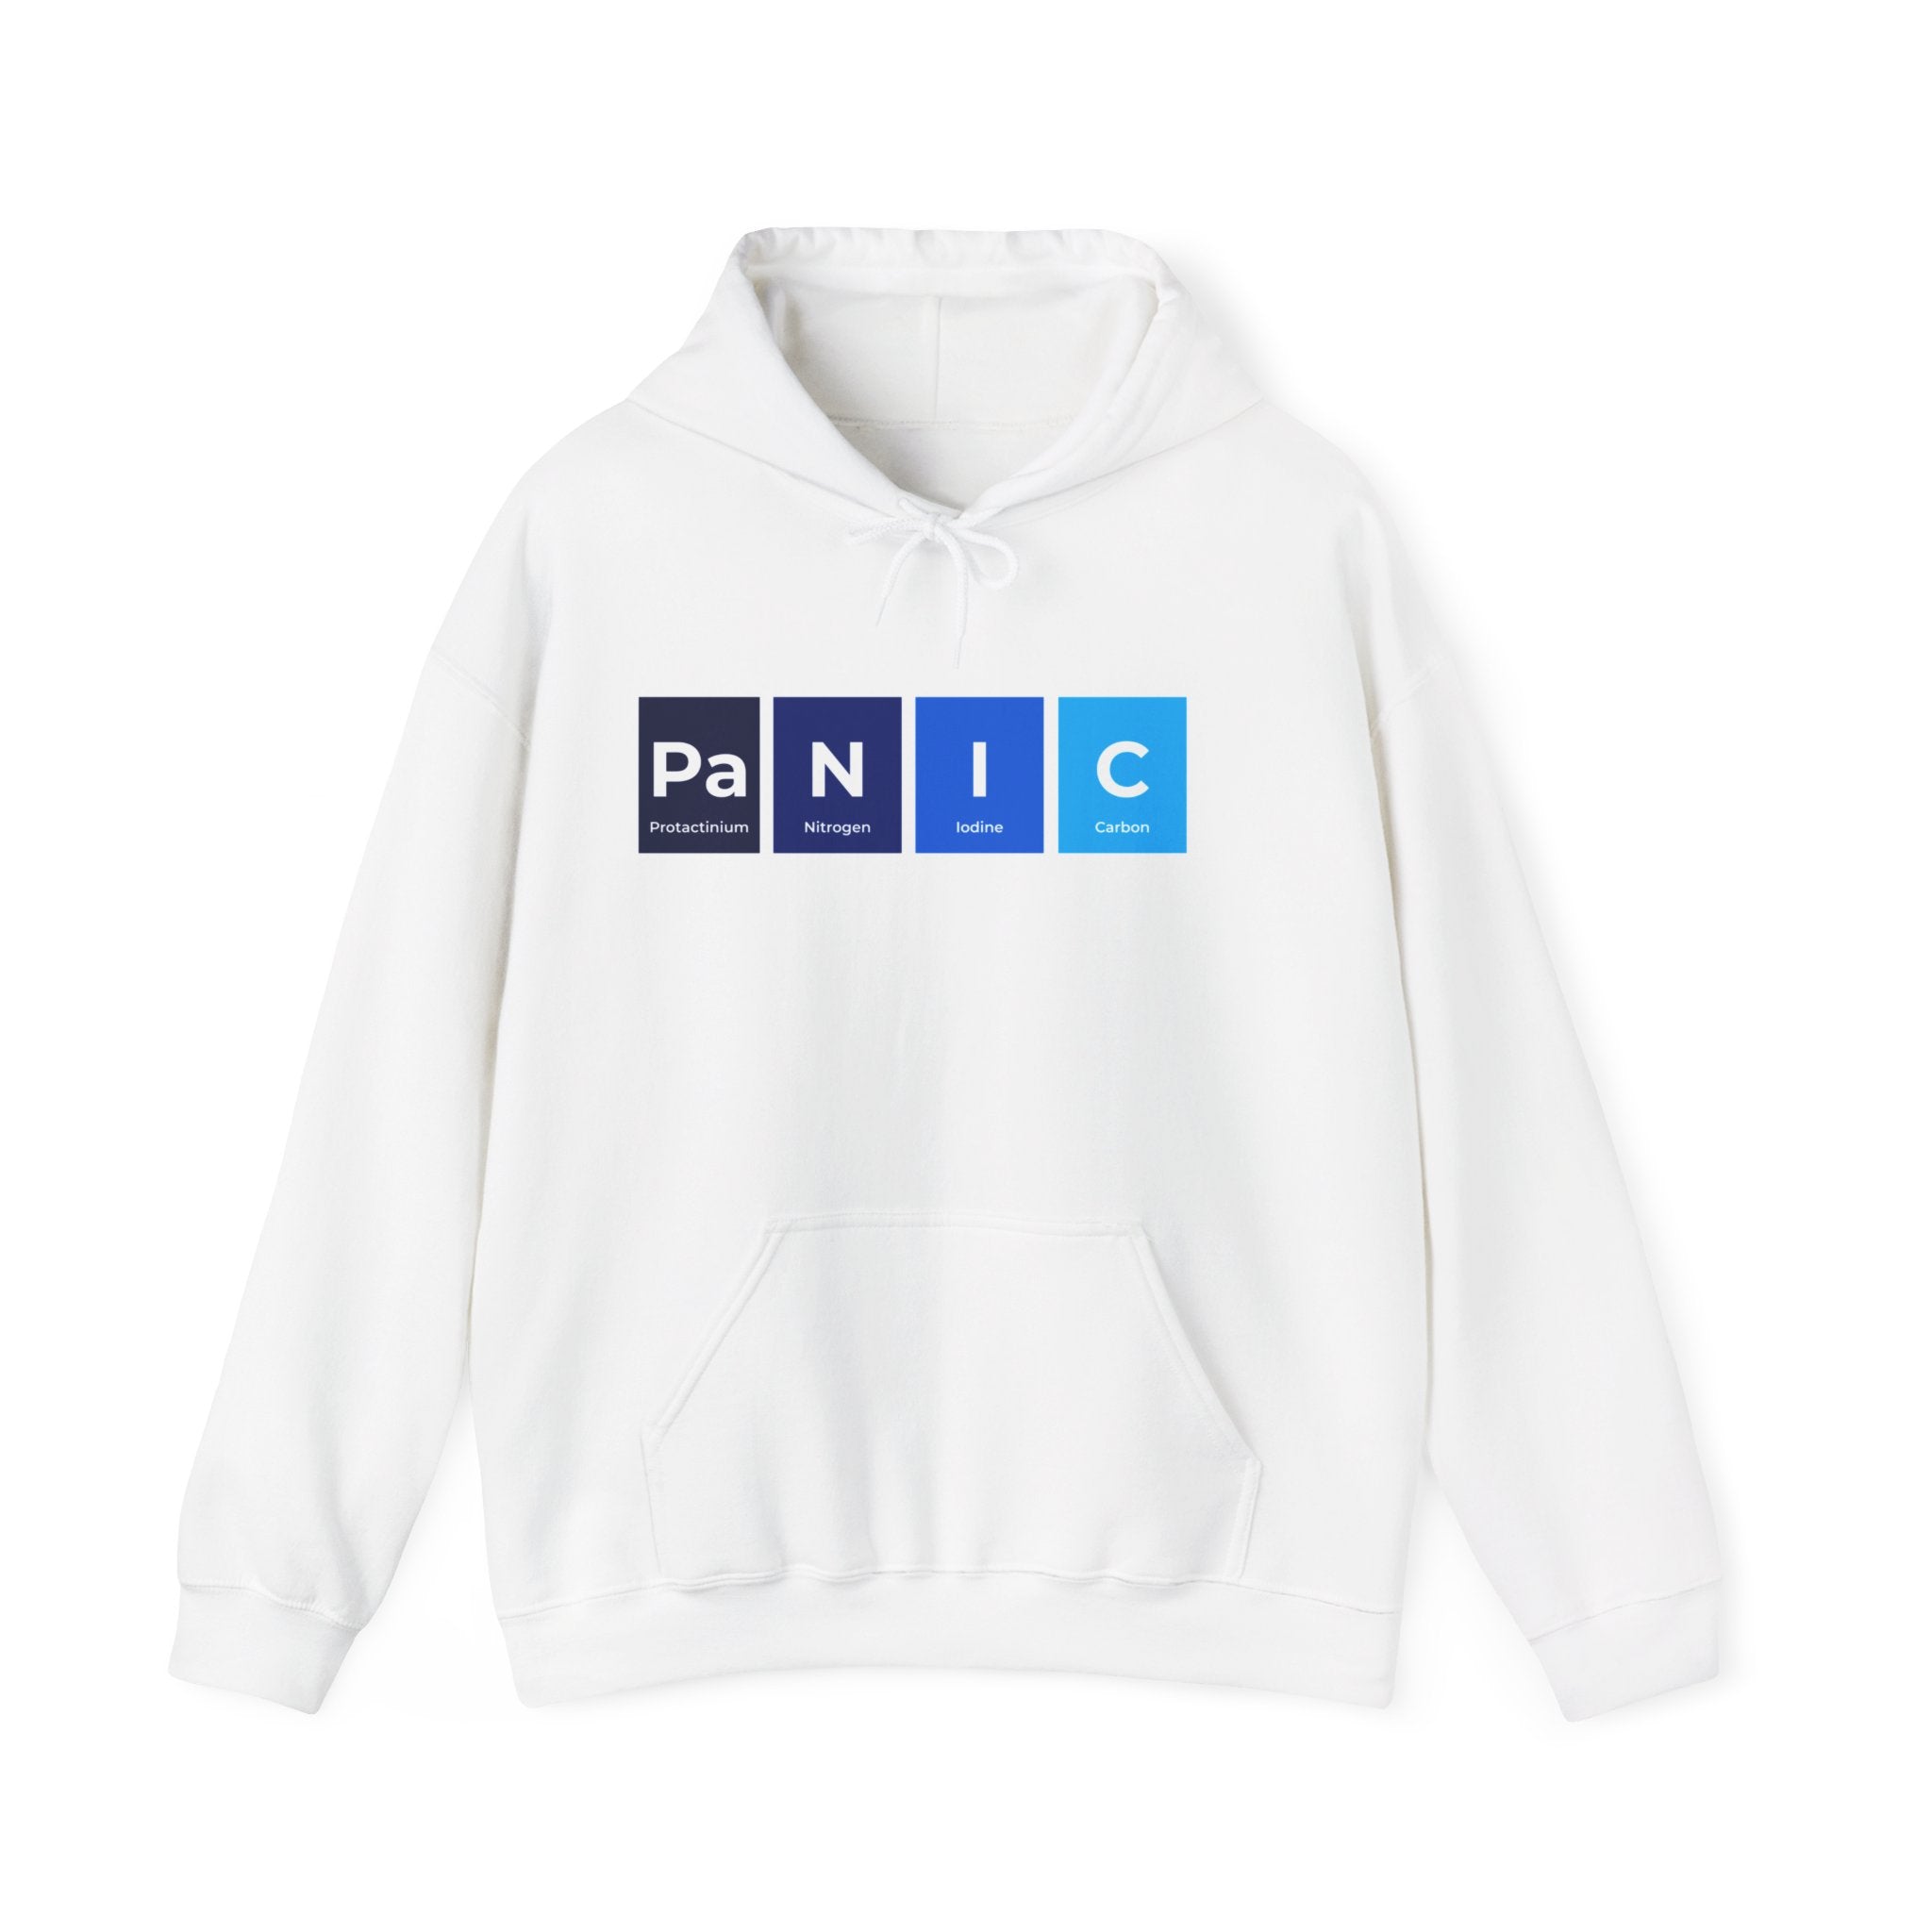 Pa-N-I-C - Hooded Sweatshirt featuring the text "PaNIC" styled as periodic table elements: Protactinium (Pa), Nitrogen (N), Iodine (I), and Carbon (C) on the front. This wardrobe essential combines fashionable designs with a clever twist for a unique look.